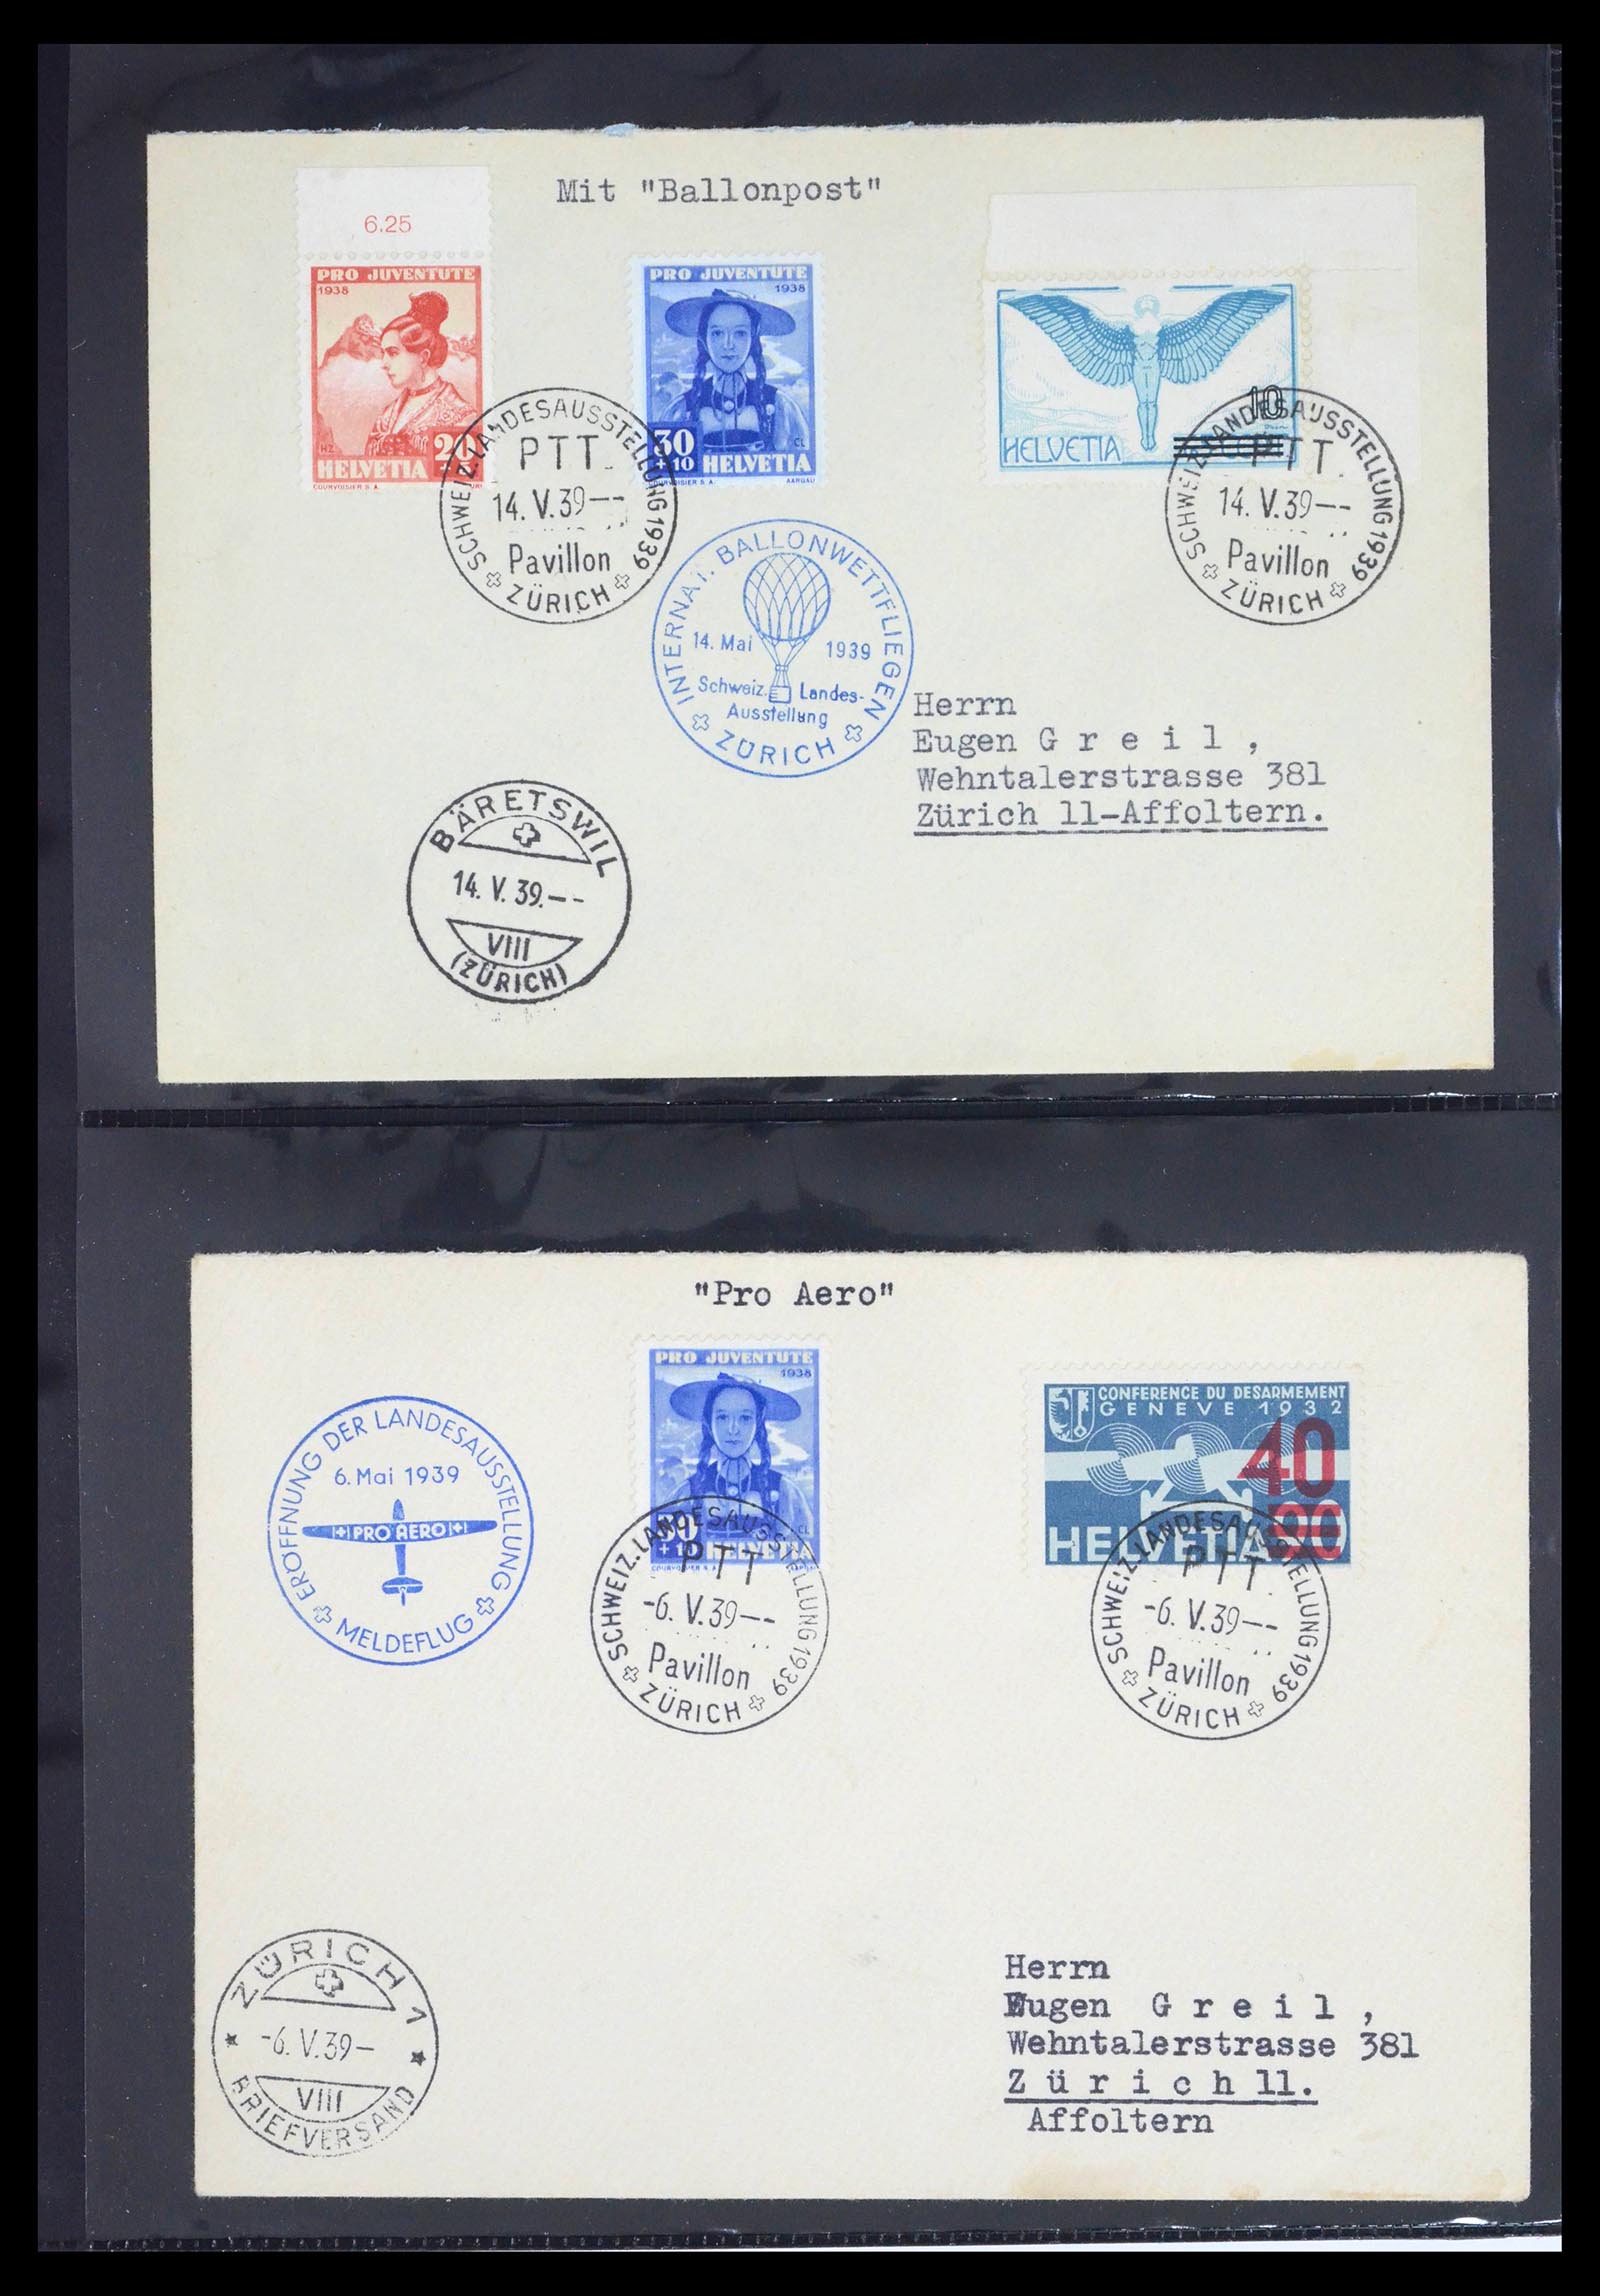 39533 0019 - Stamp collection 39533 Zwitserland airmail covers 1925-1960.